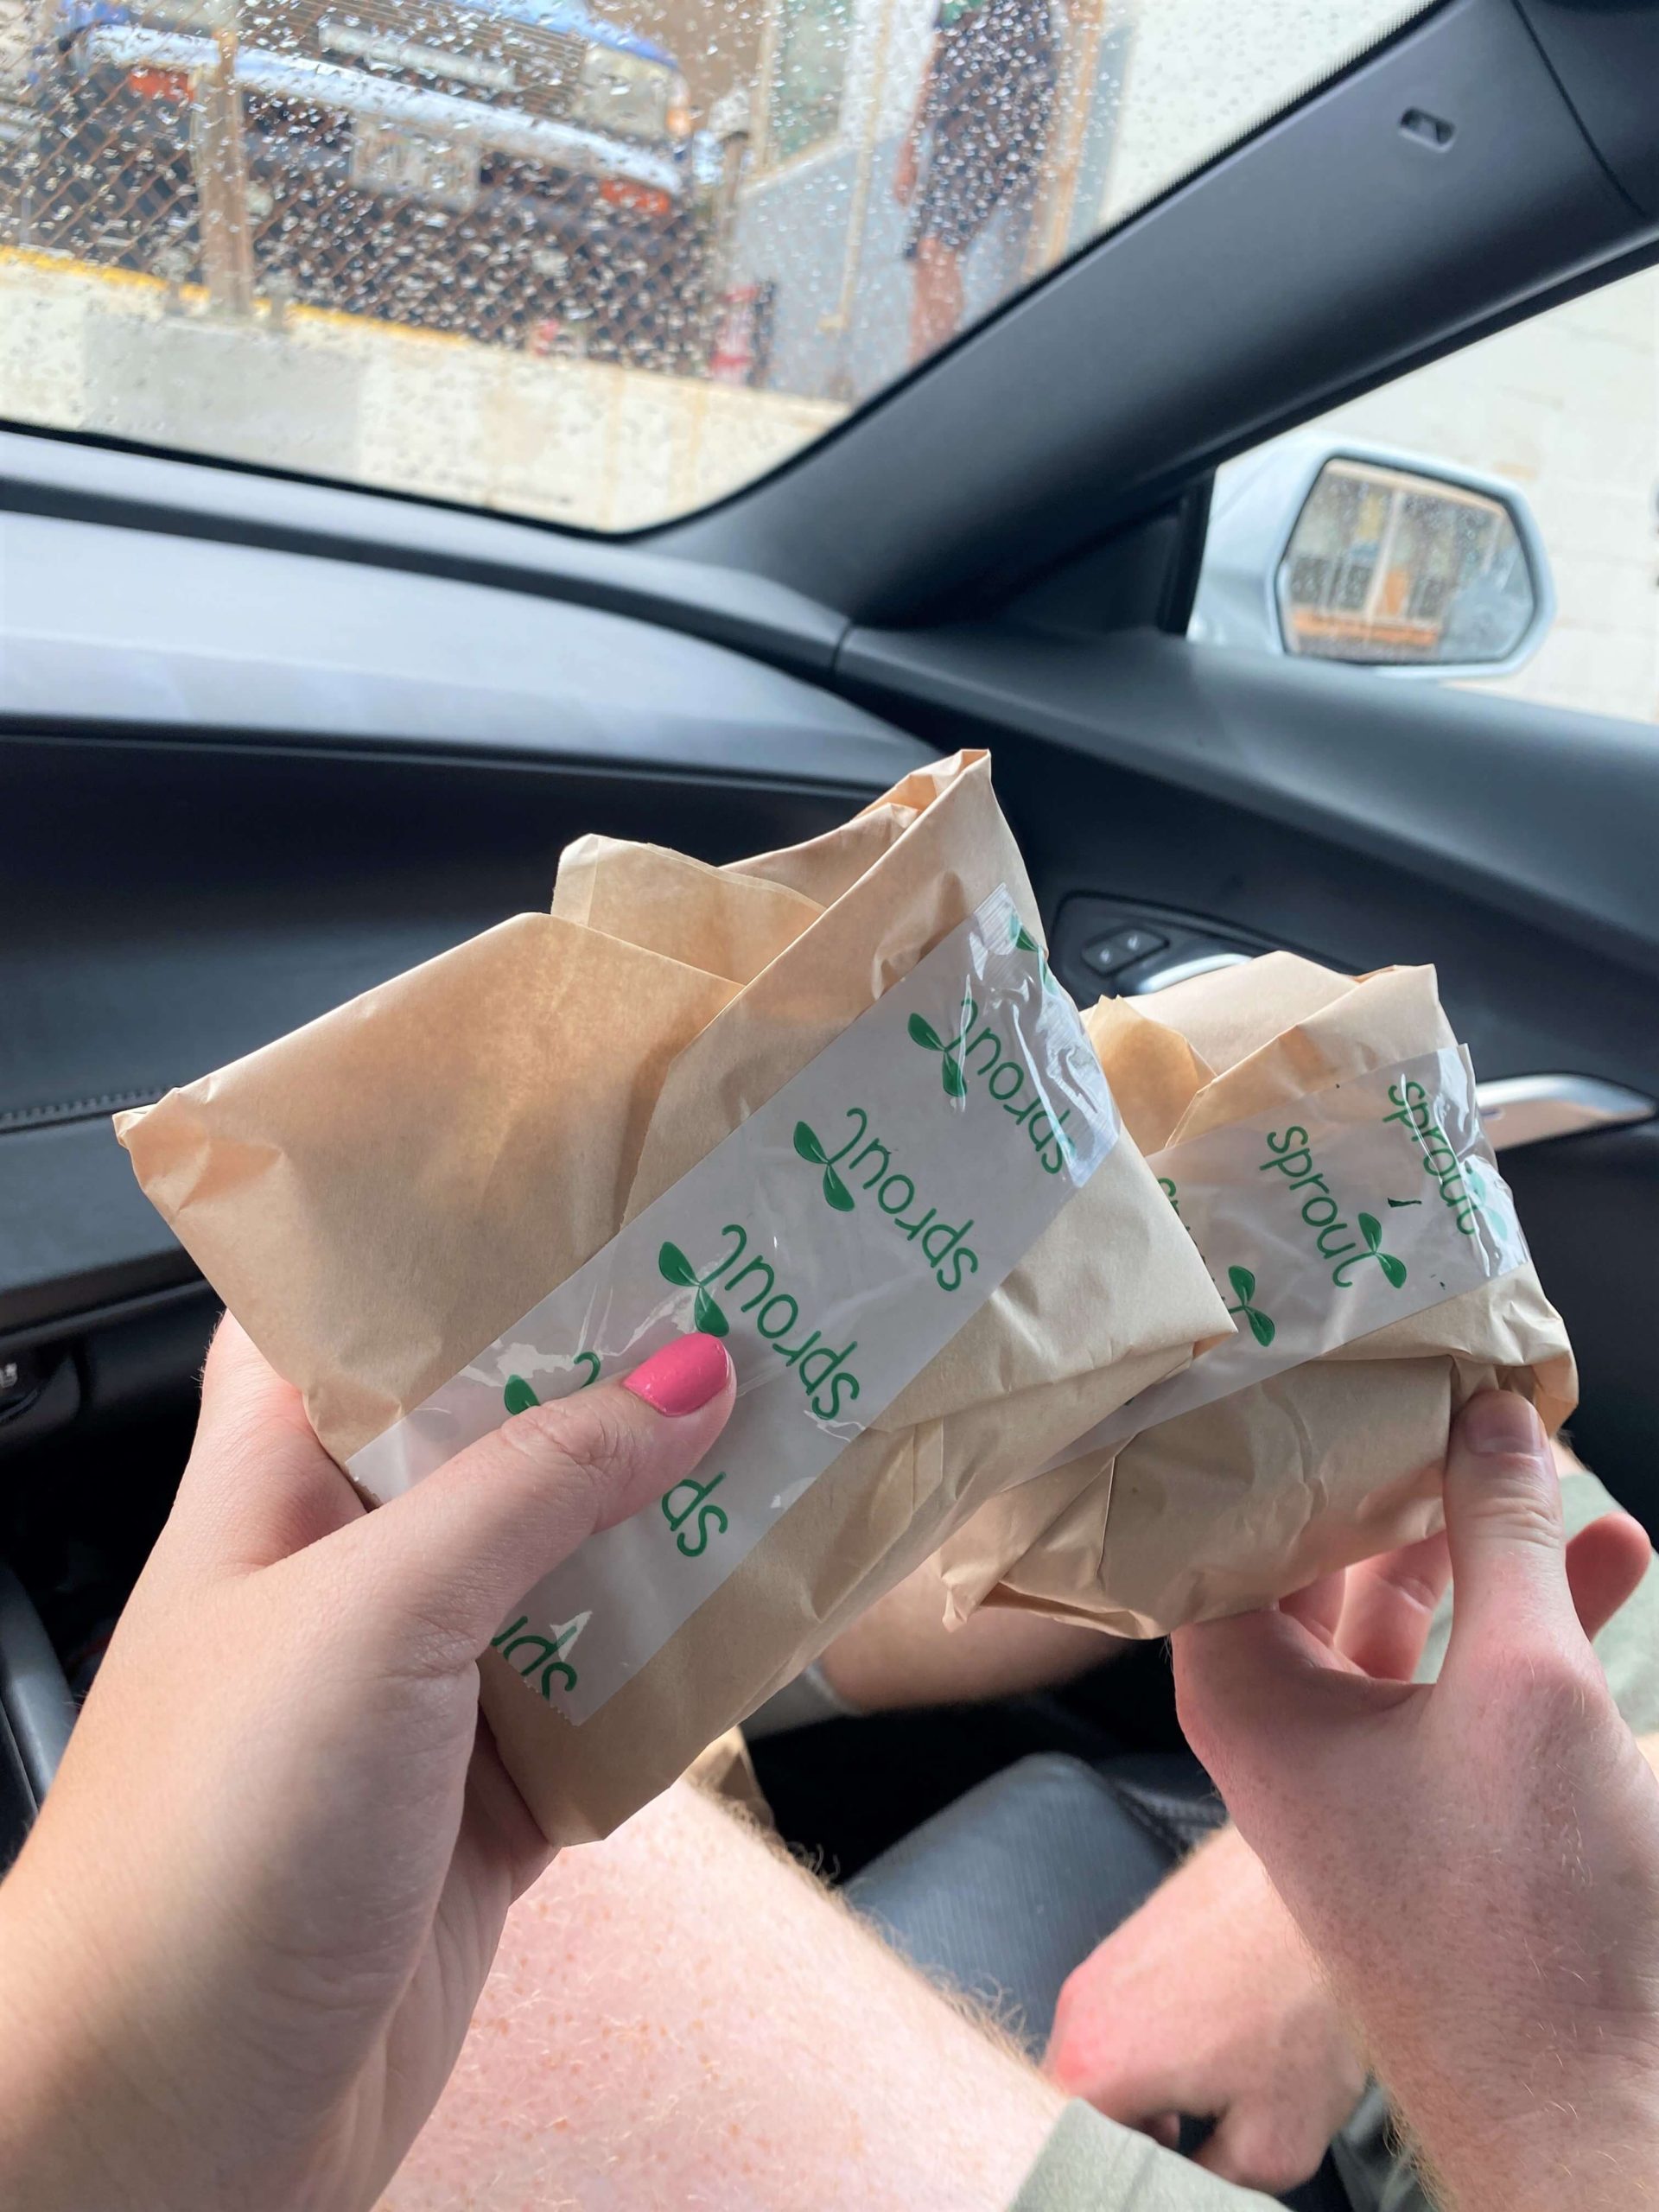 Two People Eat a Sandwich in the Car